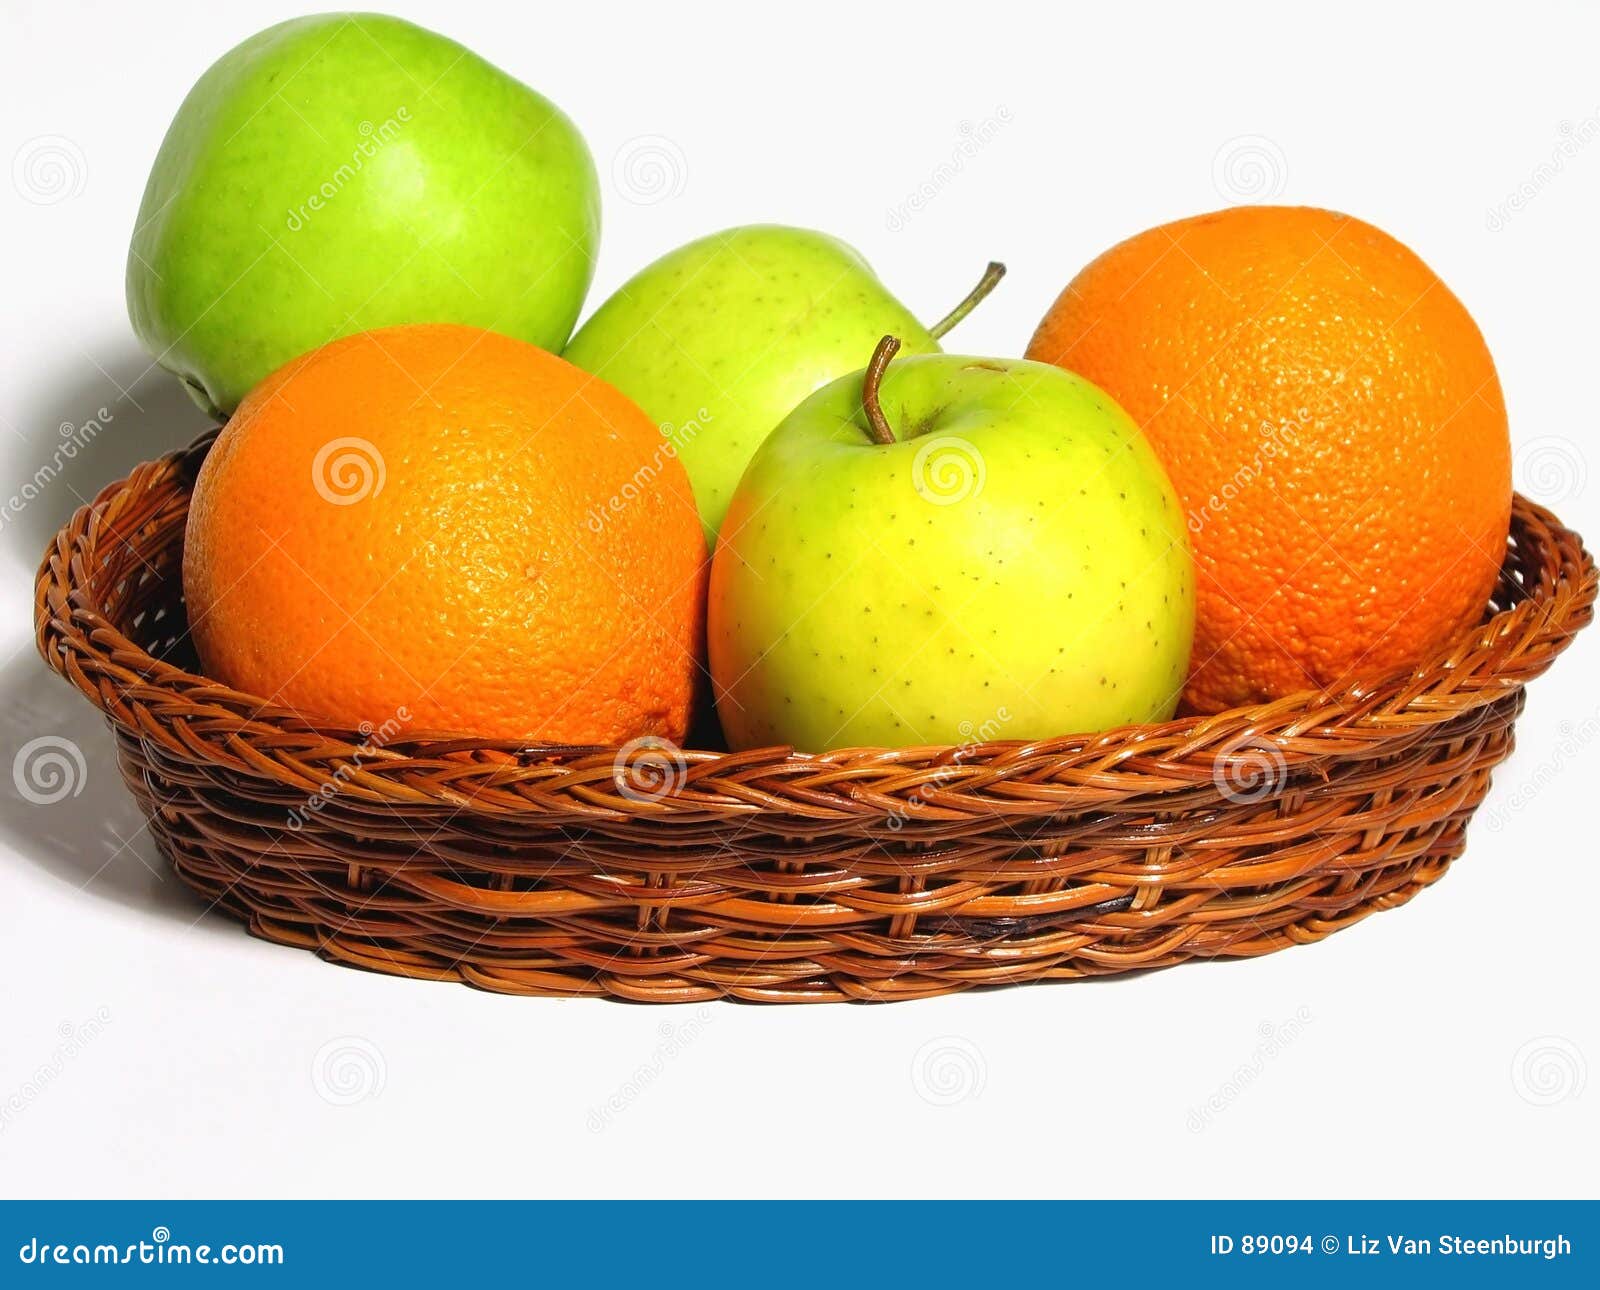  Apples and Oranges  stock photo Image of citrus 